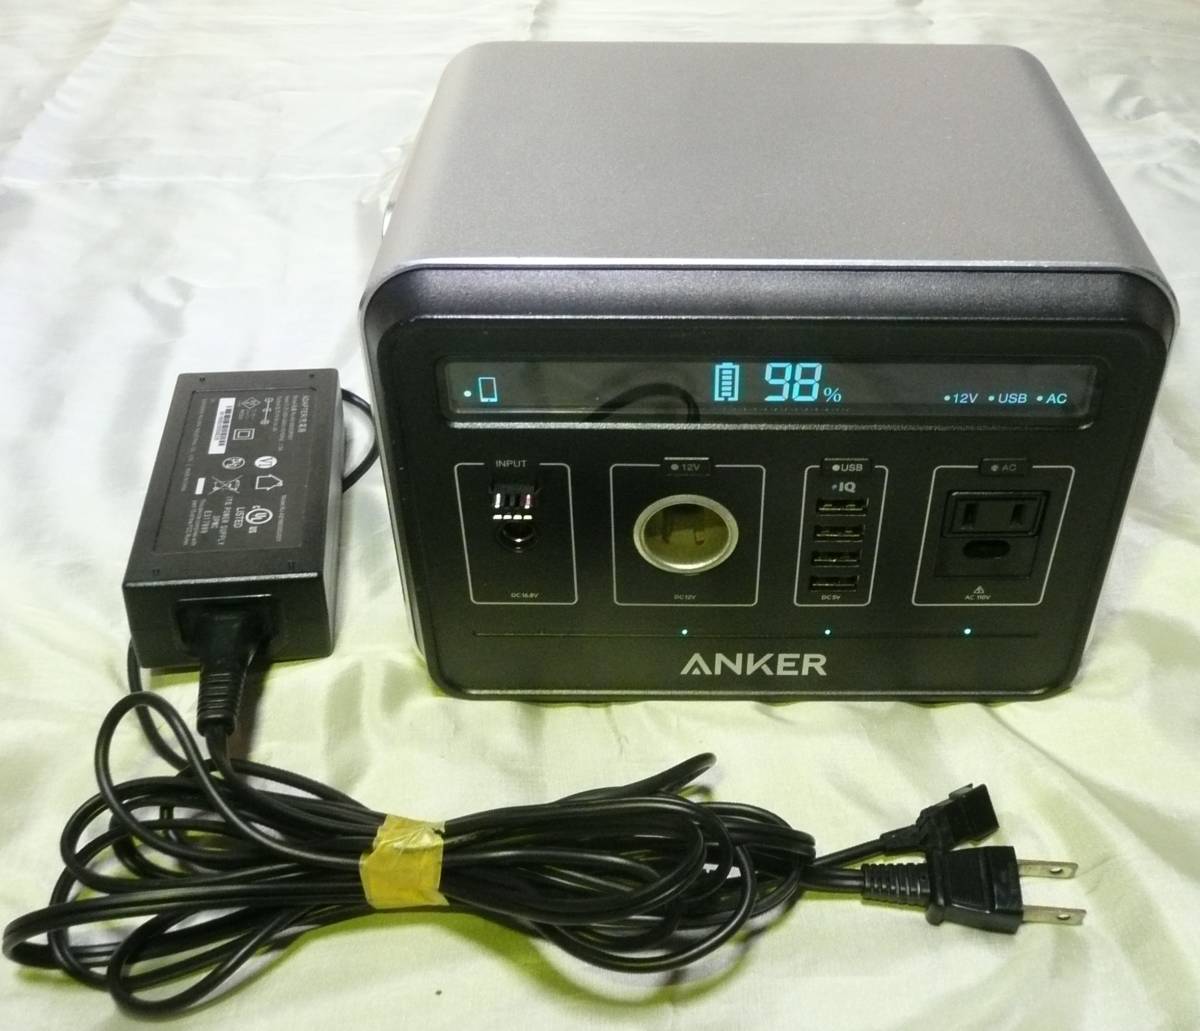 ANKER ポータブル電源 PowerHouse A1701 434Wh 充電コネクター改良品の画像1